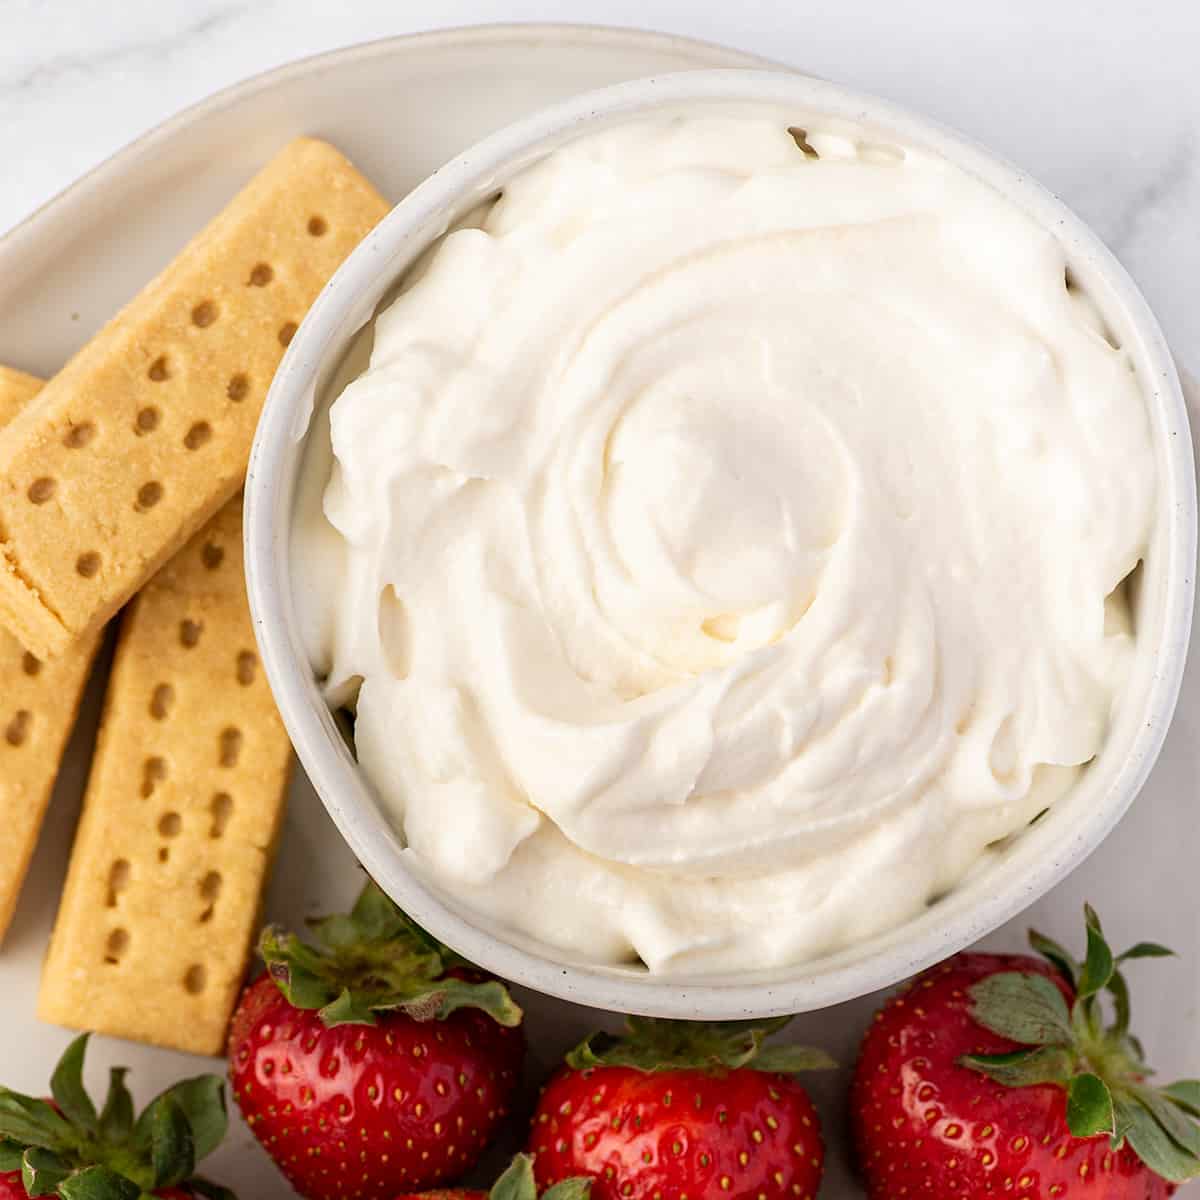 Cool Whip Cream Cheese Frosting